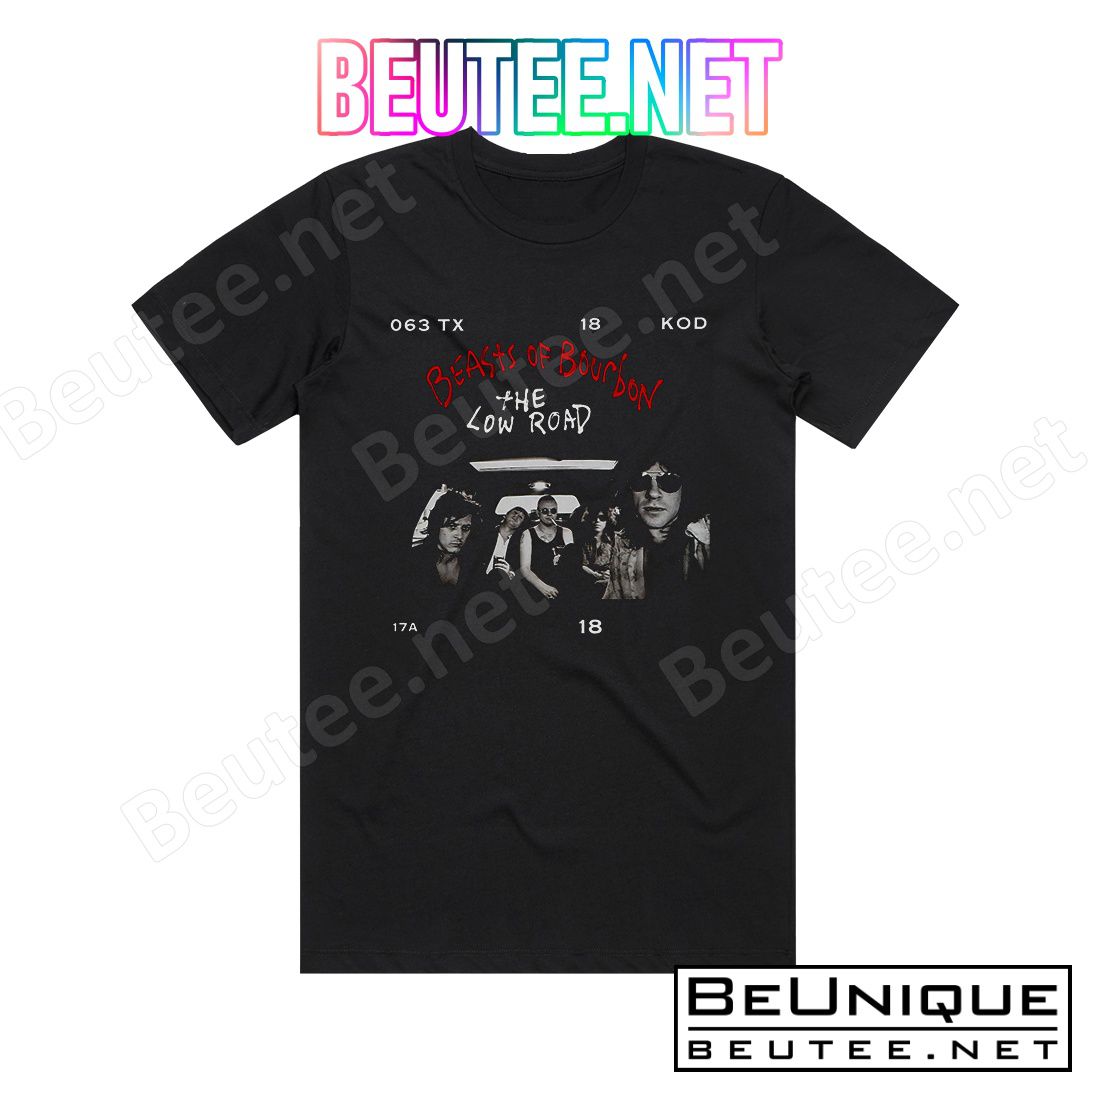 Beasts of Bourbon The Low Road Album Cover T-Shirt